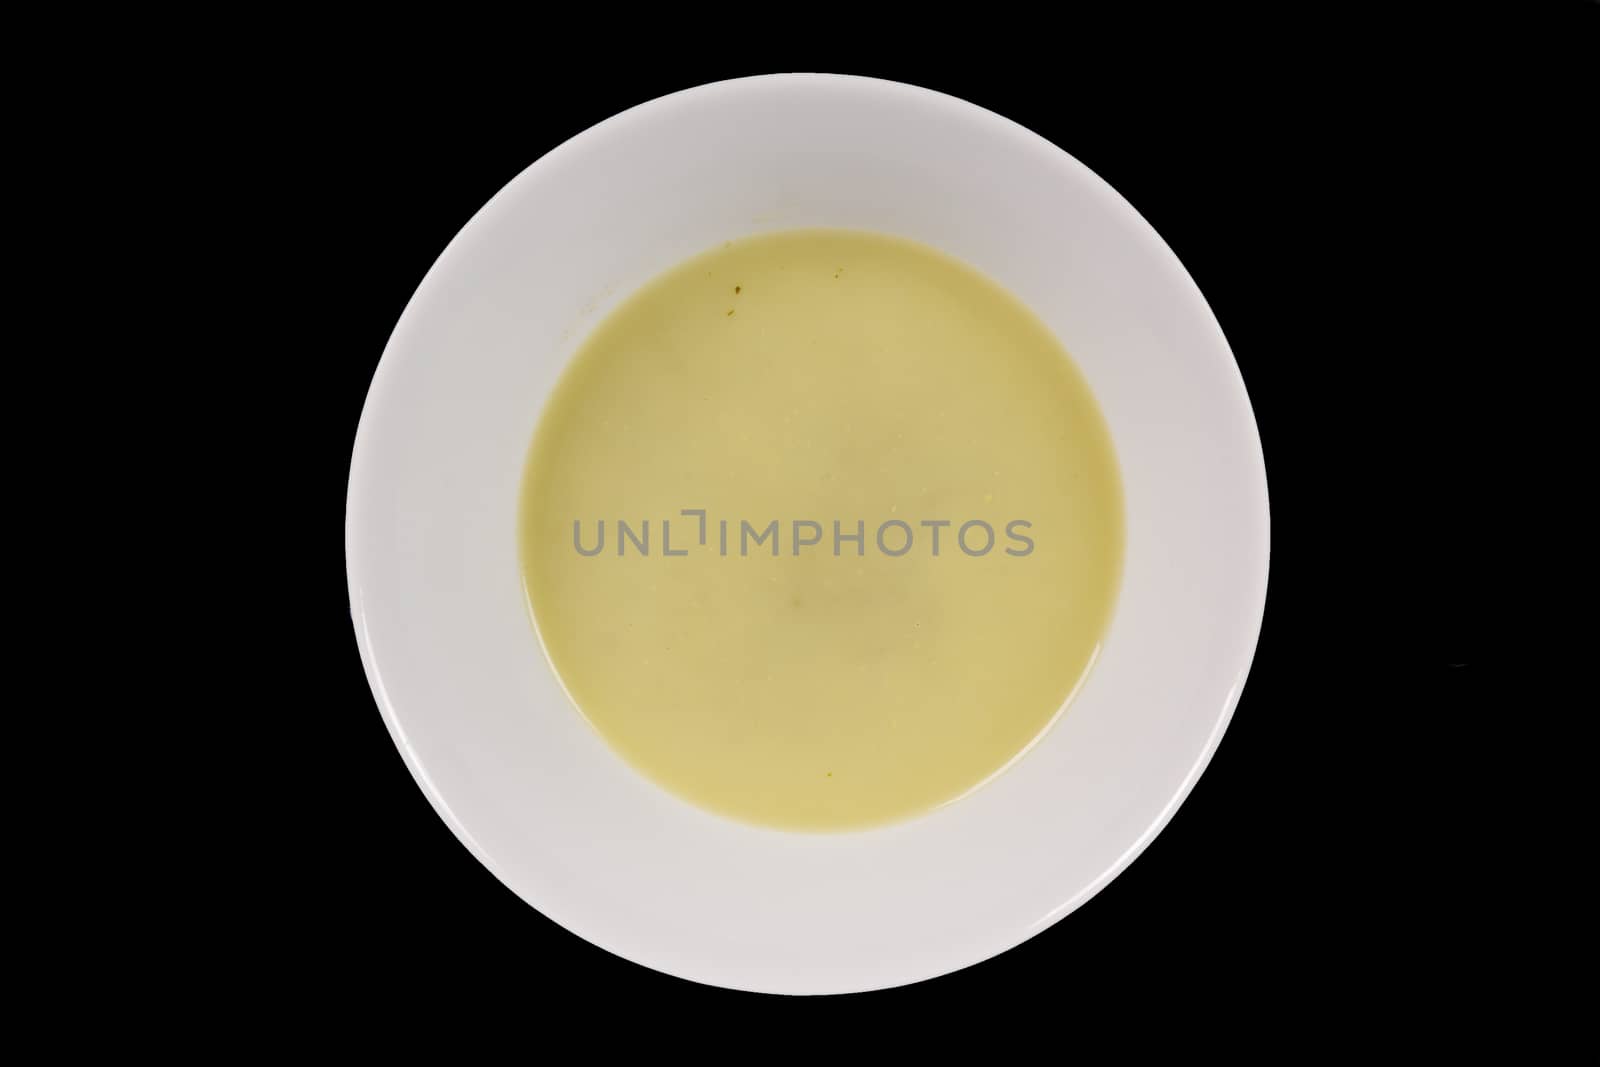 Healthy spinach soup on a black background